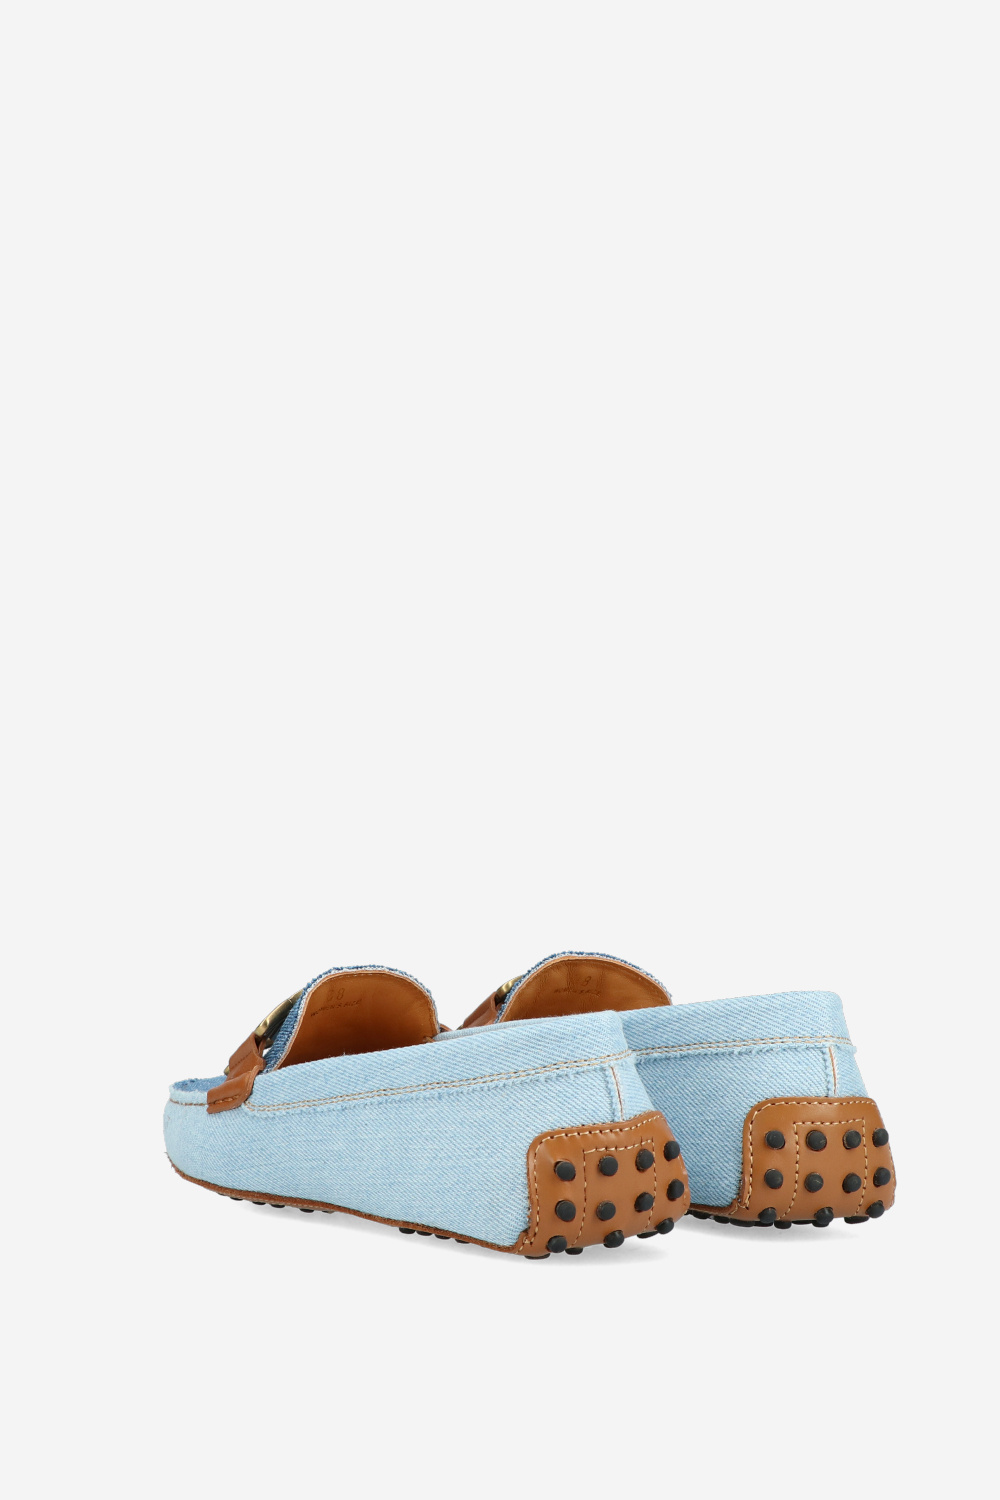 Tods Loafers Blauw